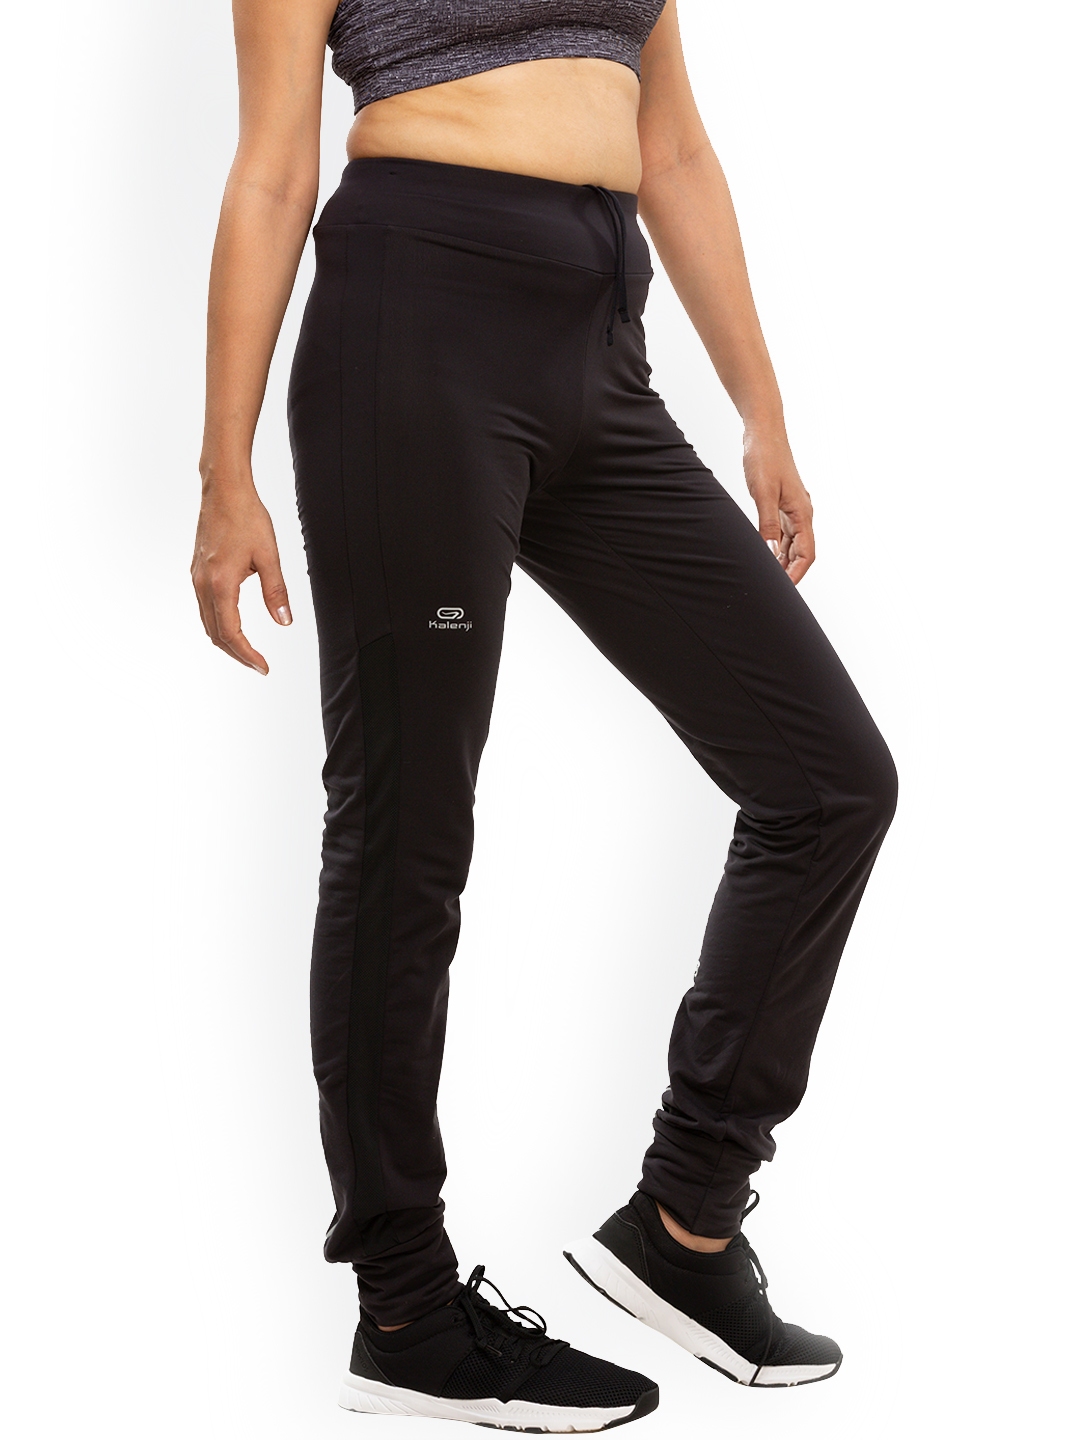 Womens Running Warm Long Leggings Sports Trousers Warm+ -With